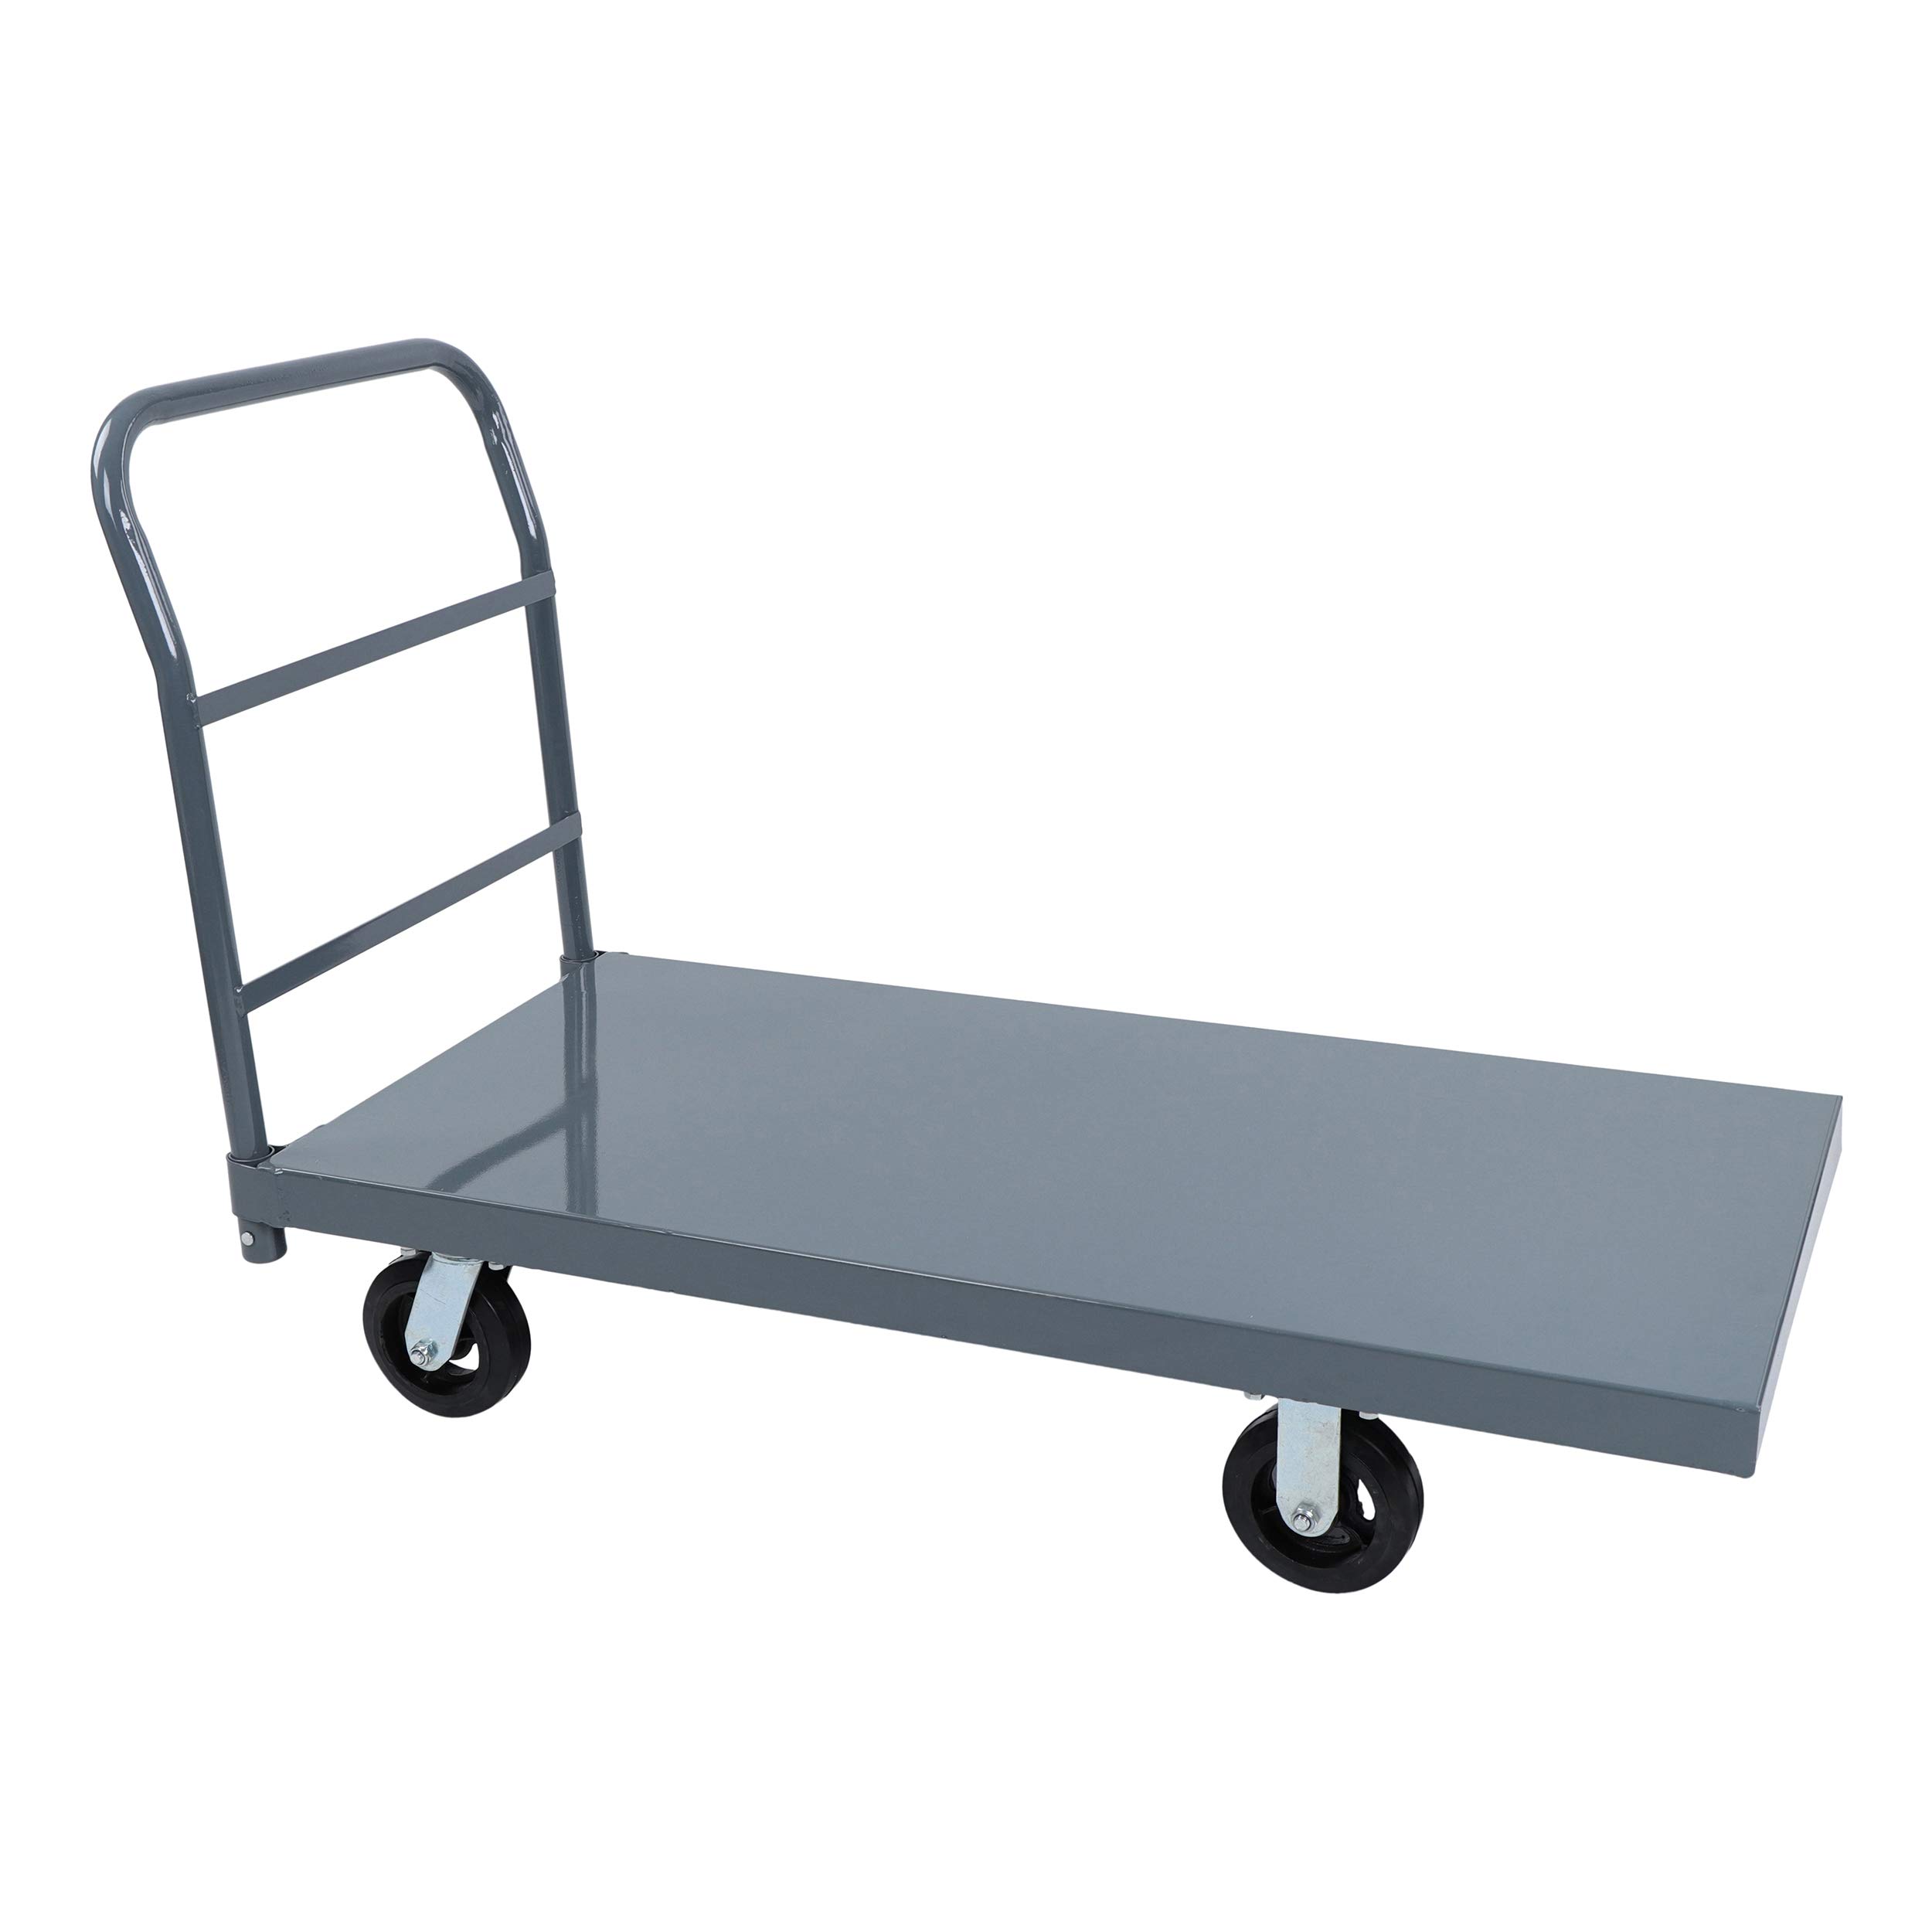 BISupply Flat Platform Truck Industrial Push Cart 48 x 24in Portable Dolly Large Flatbed with Wheels 2000lb Capacity